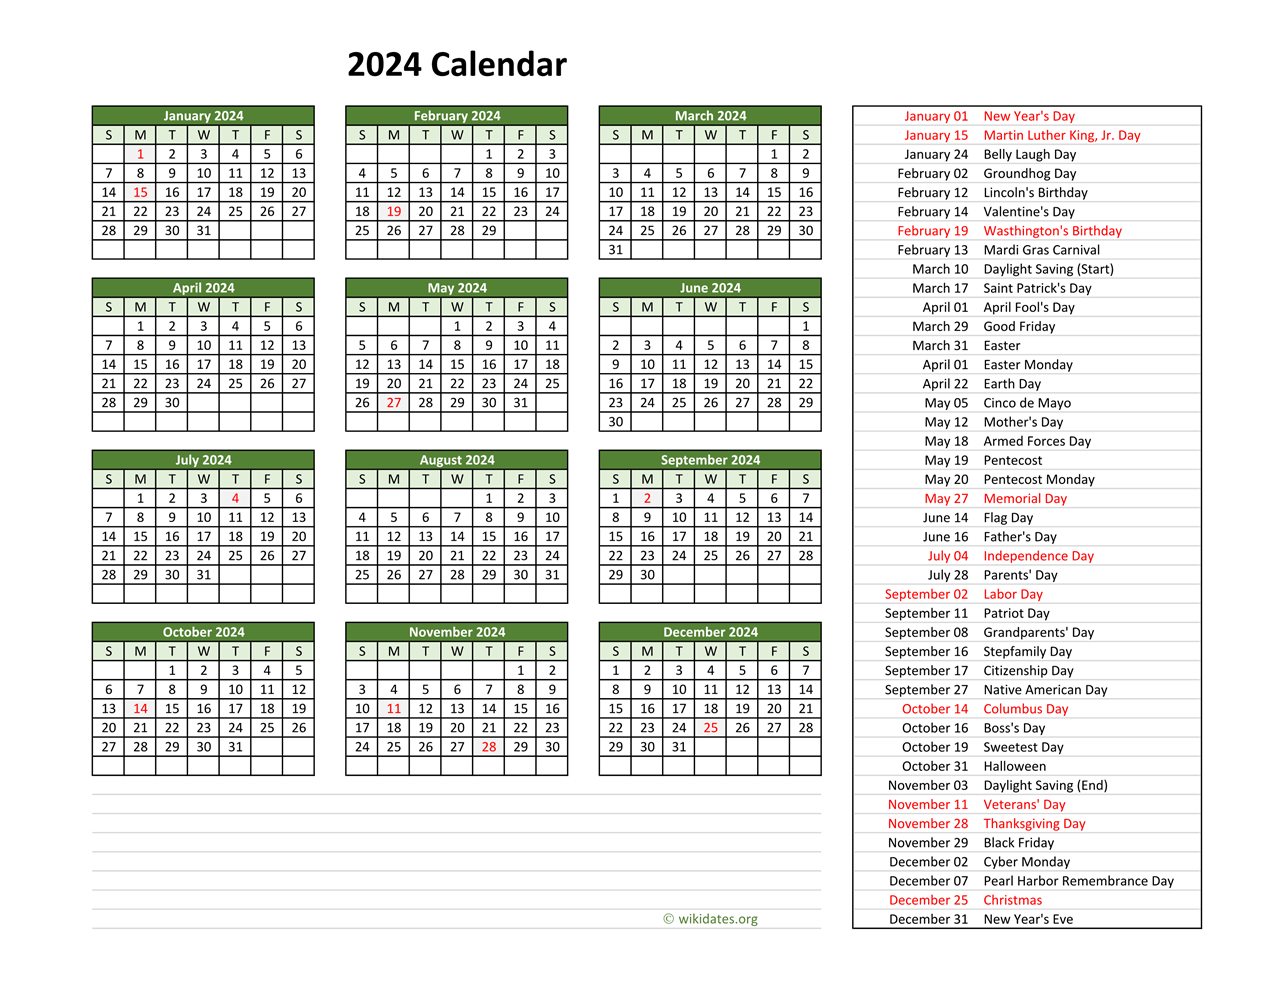 2024 Calendar with US Holidays | WikiDates.org